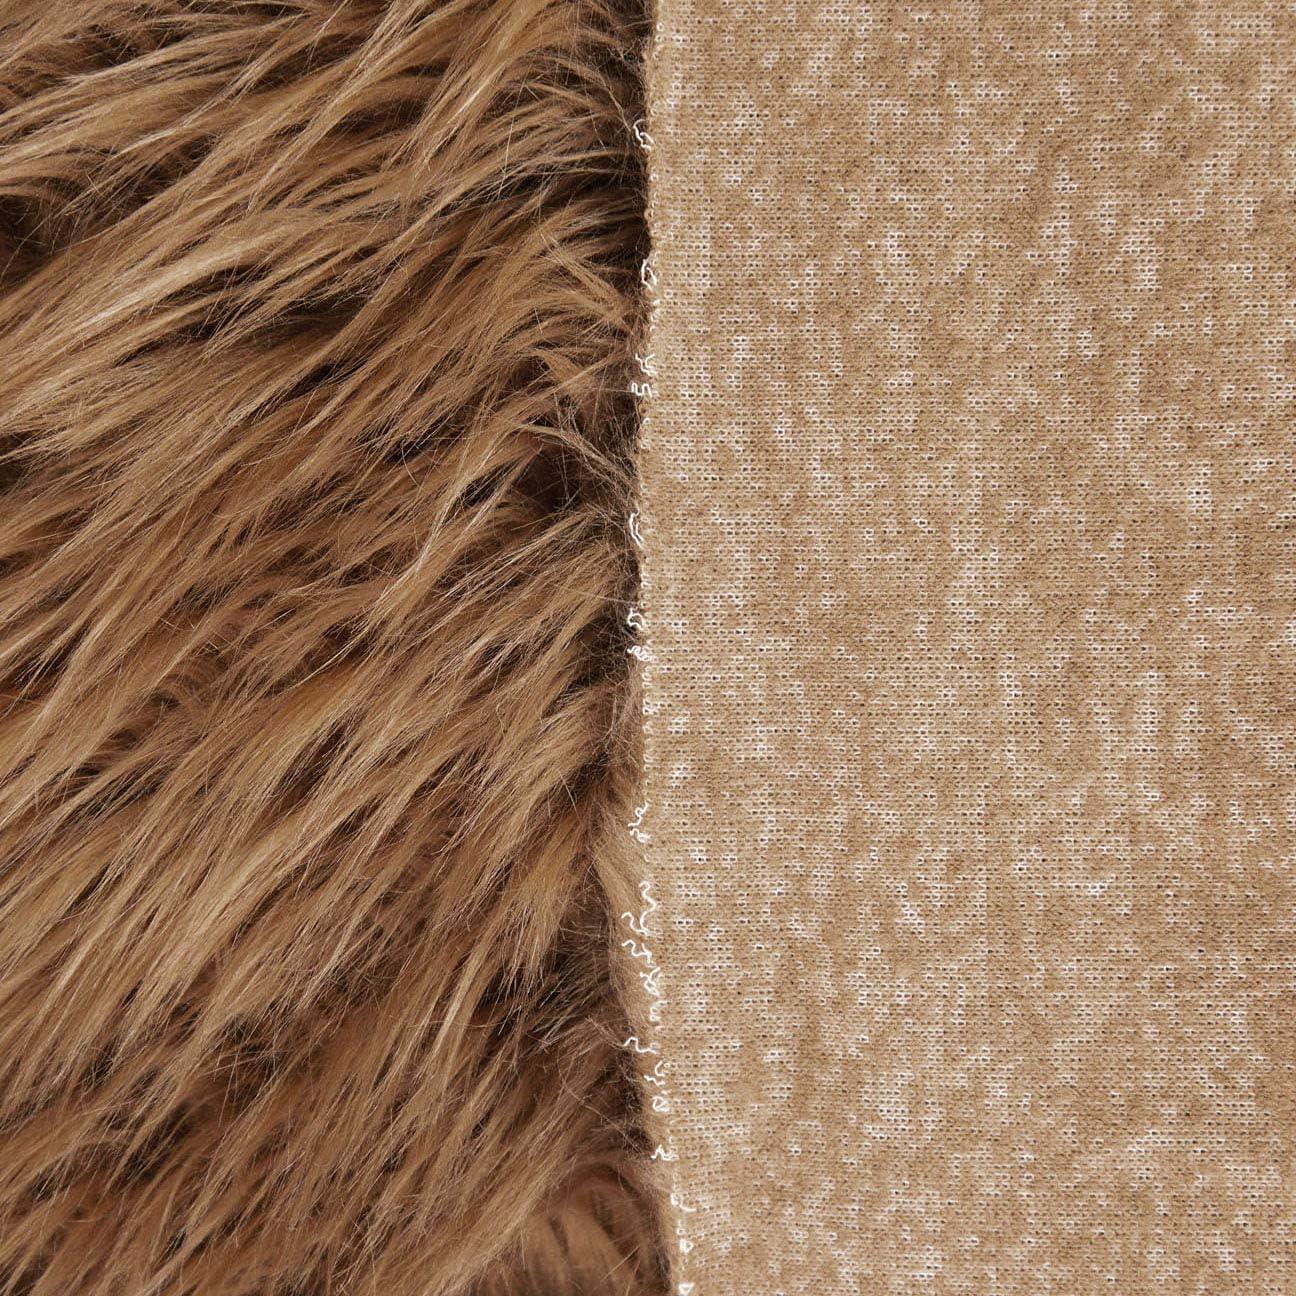 DARK BROWN 60 Wide Shaggy Faux Fur Fabric (Sold By The Yard